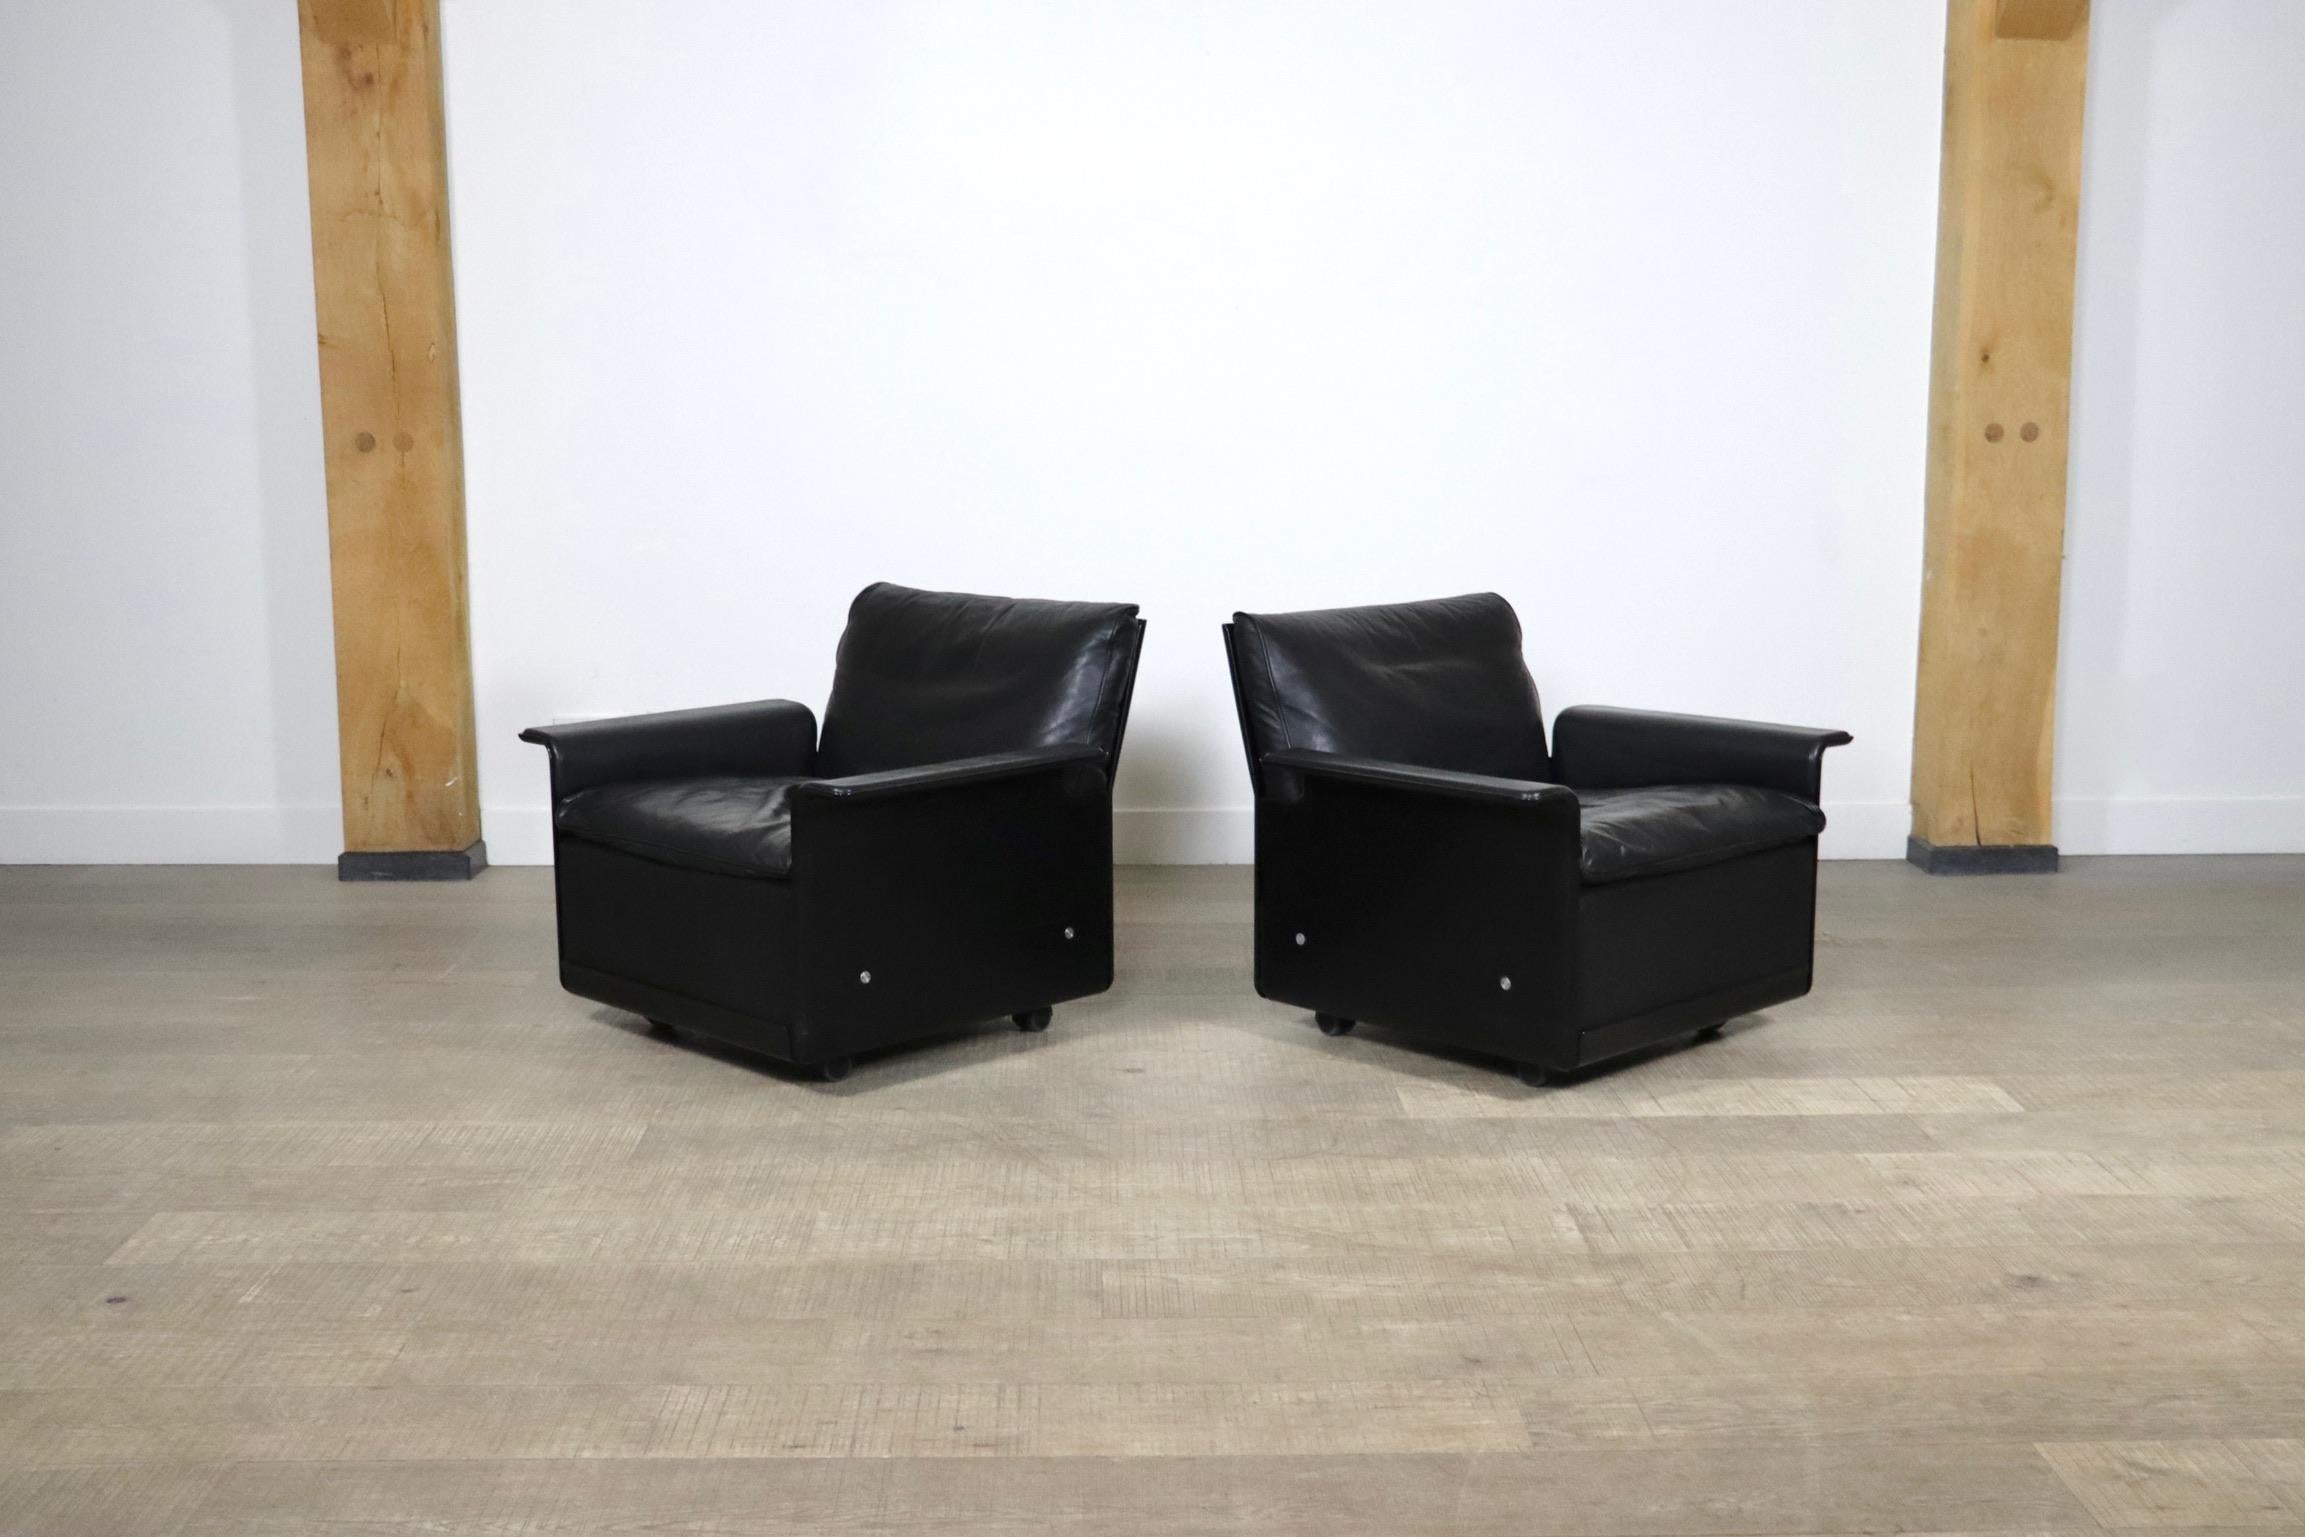 Pair Of Dieter Rams Model 620 Lounge Chairs In Black Leather For Vitsoe, 1980s 1